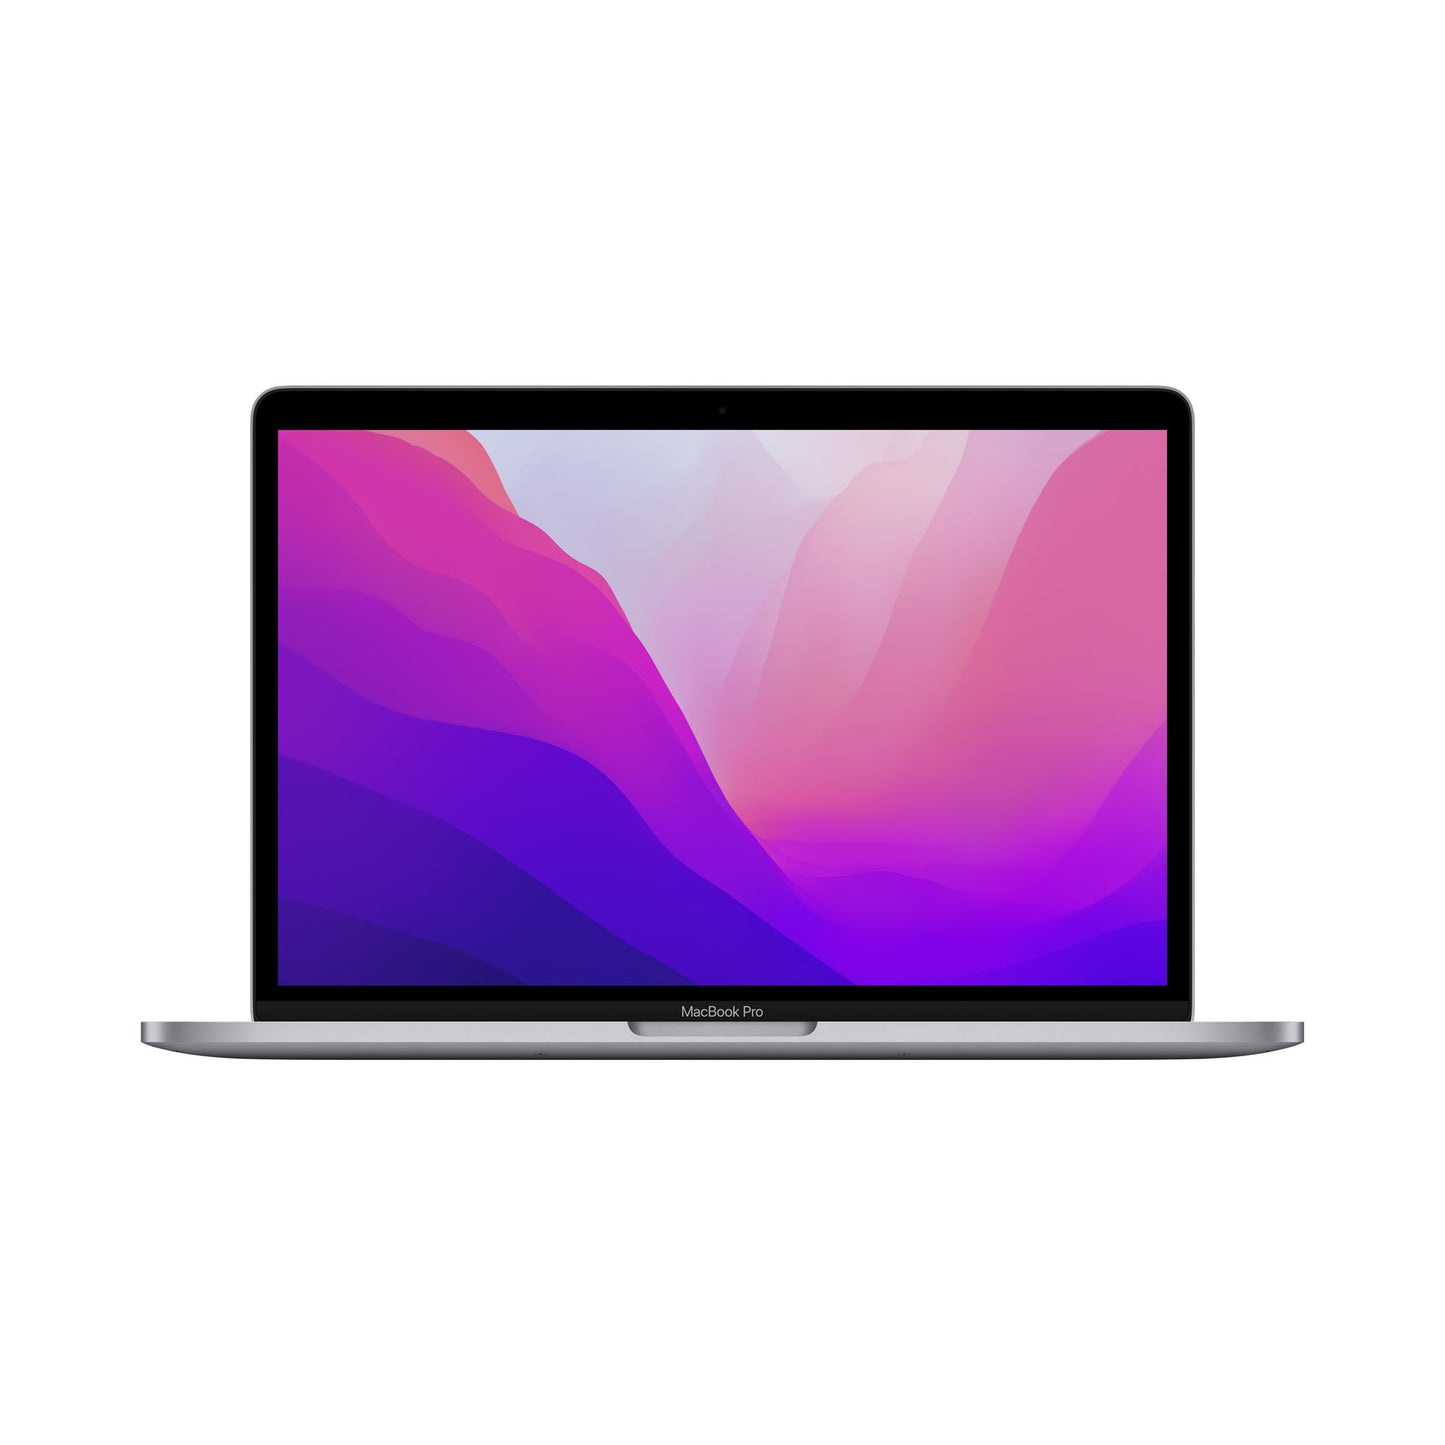 13-inch MacBook Pro: Apple M2 chip with 8-core CPU and 10-core GPU 512GB SSD - Space Grey